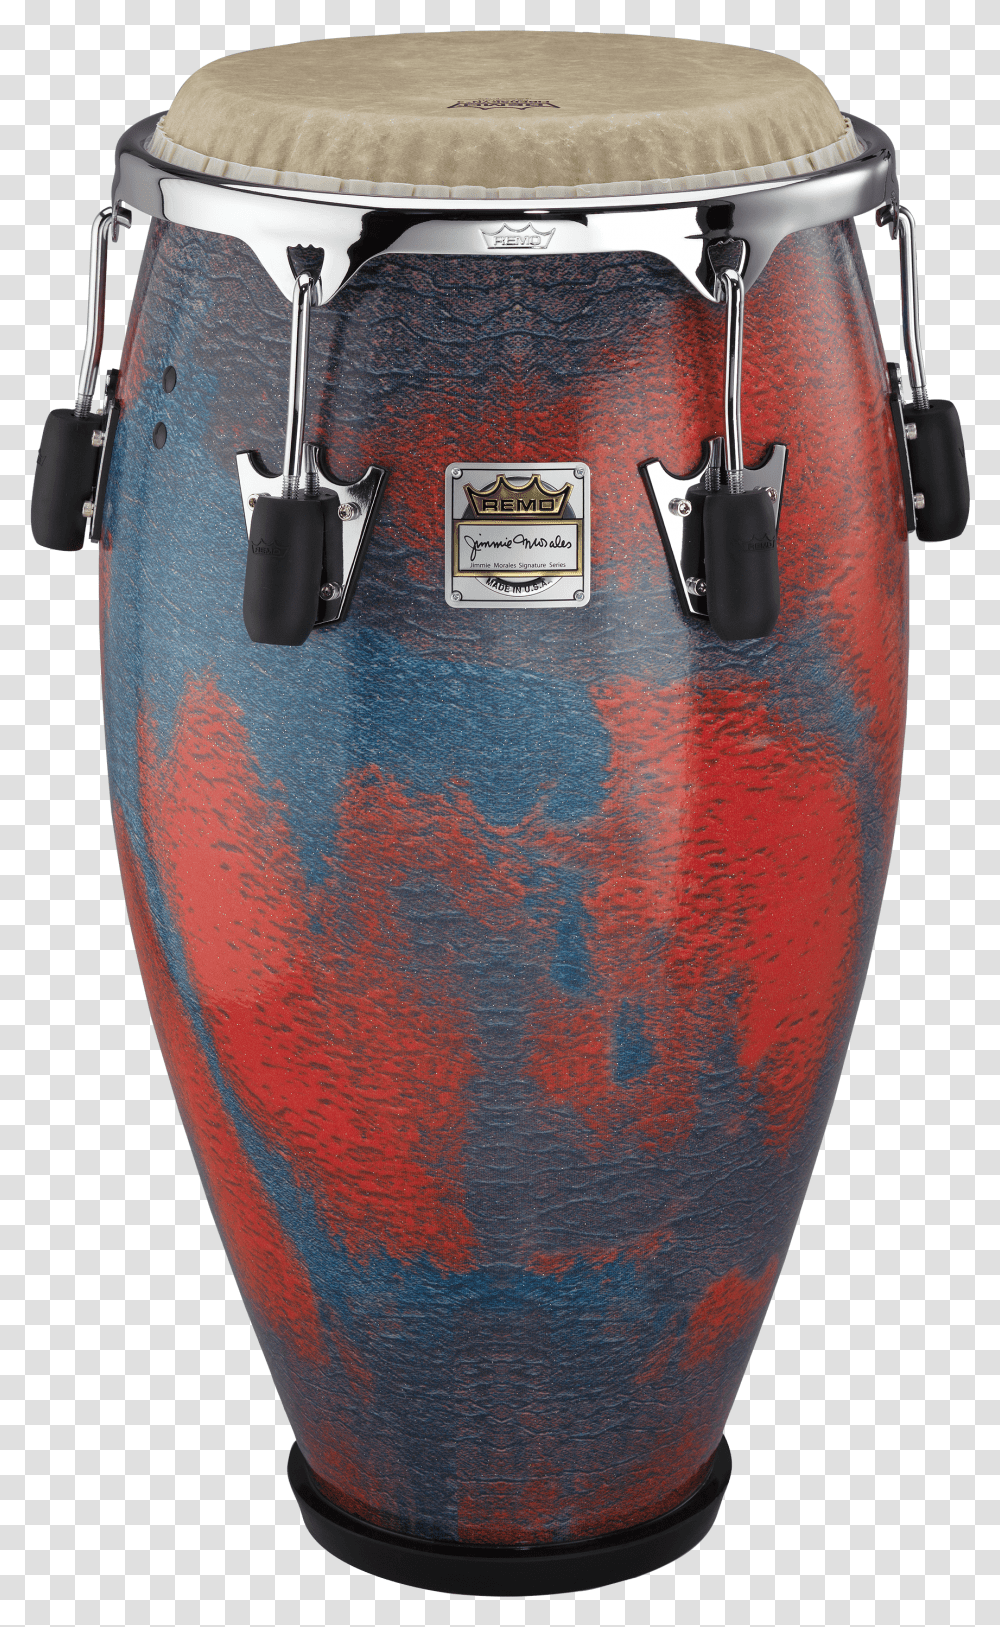 Remo Valencia Jimmie Morales Conga Drum Petrified Cave Conga, Percussion, Musical Instrument, Leisure Activities, Rug Transparent Png